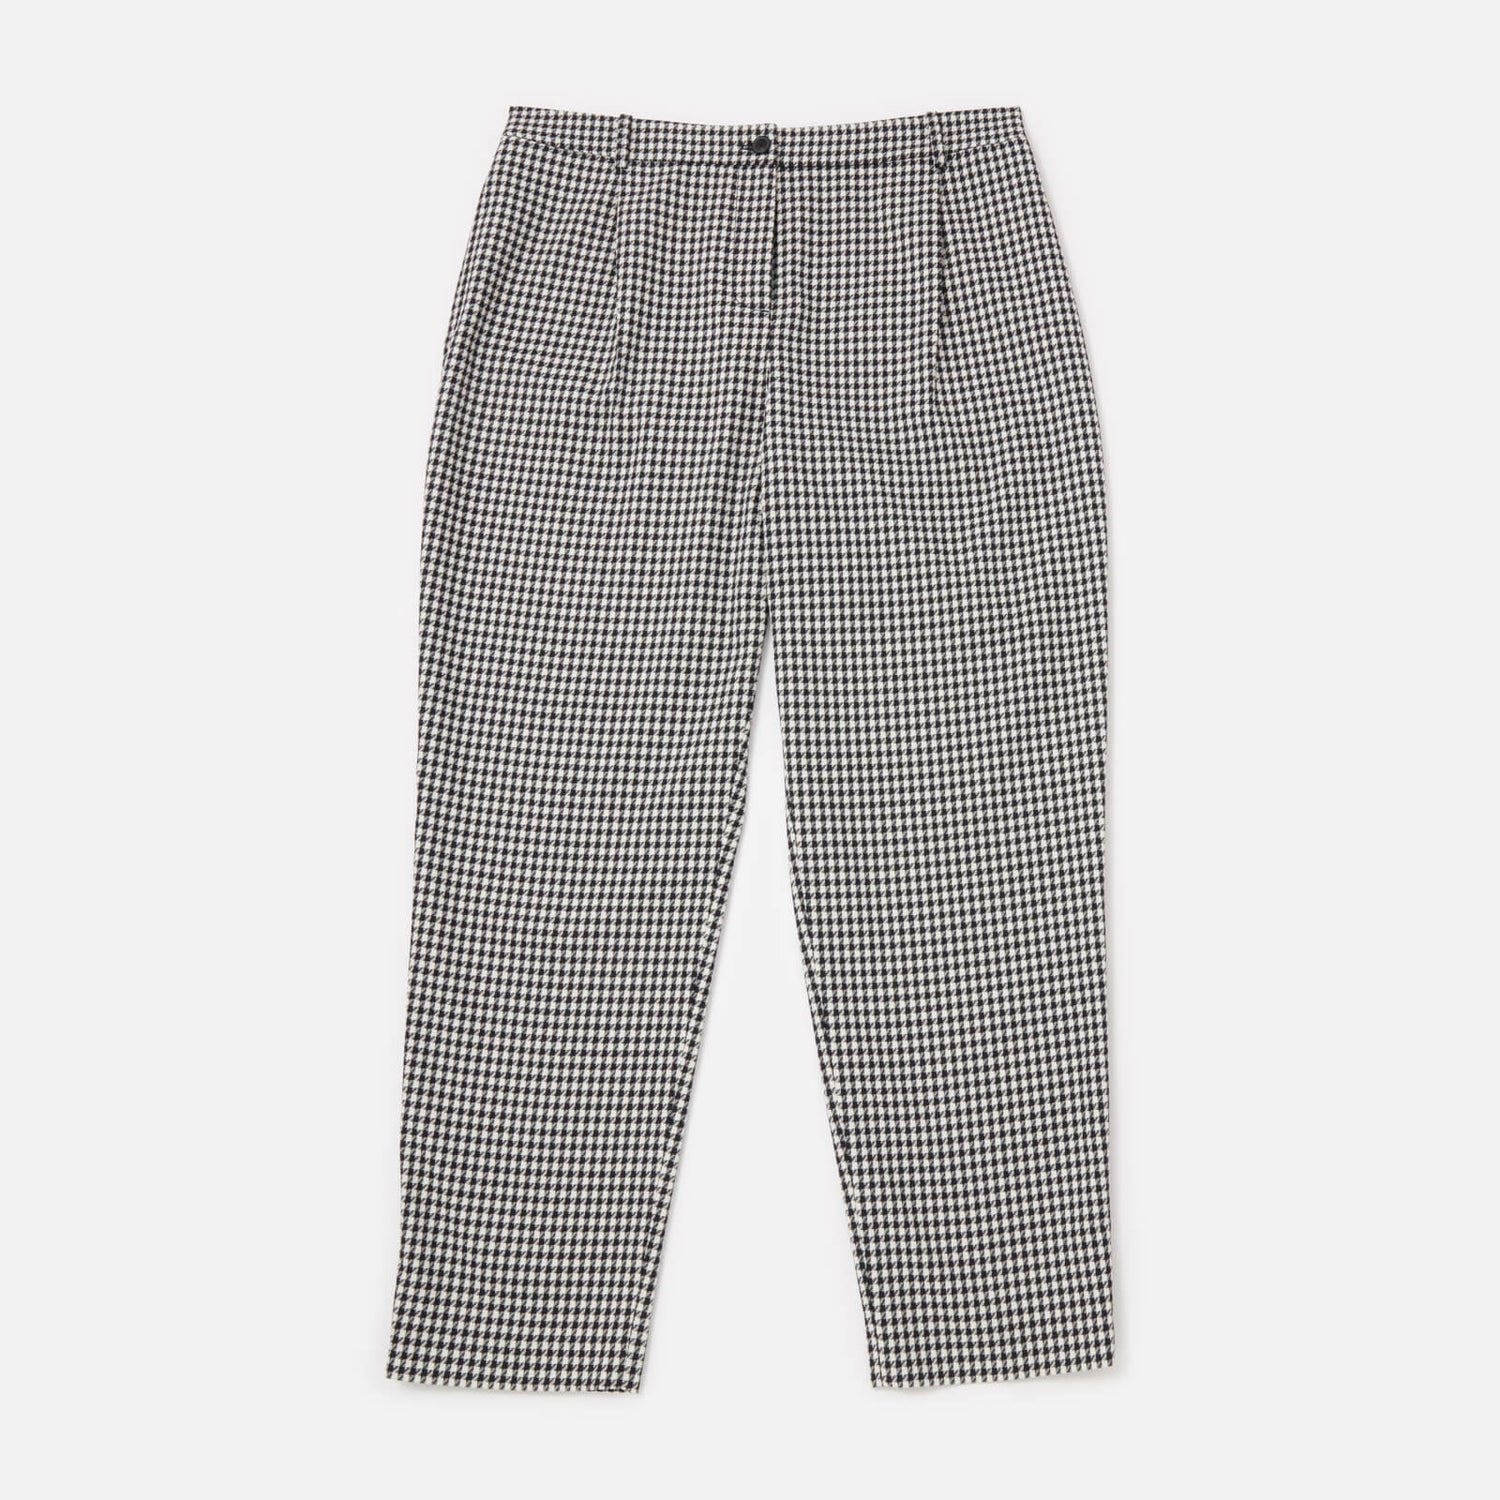 Tommy Hilfiger Women's Y/D Houndstooth Tapered Pants - Small Houndstooth/Des Sky Ecru